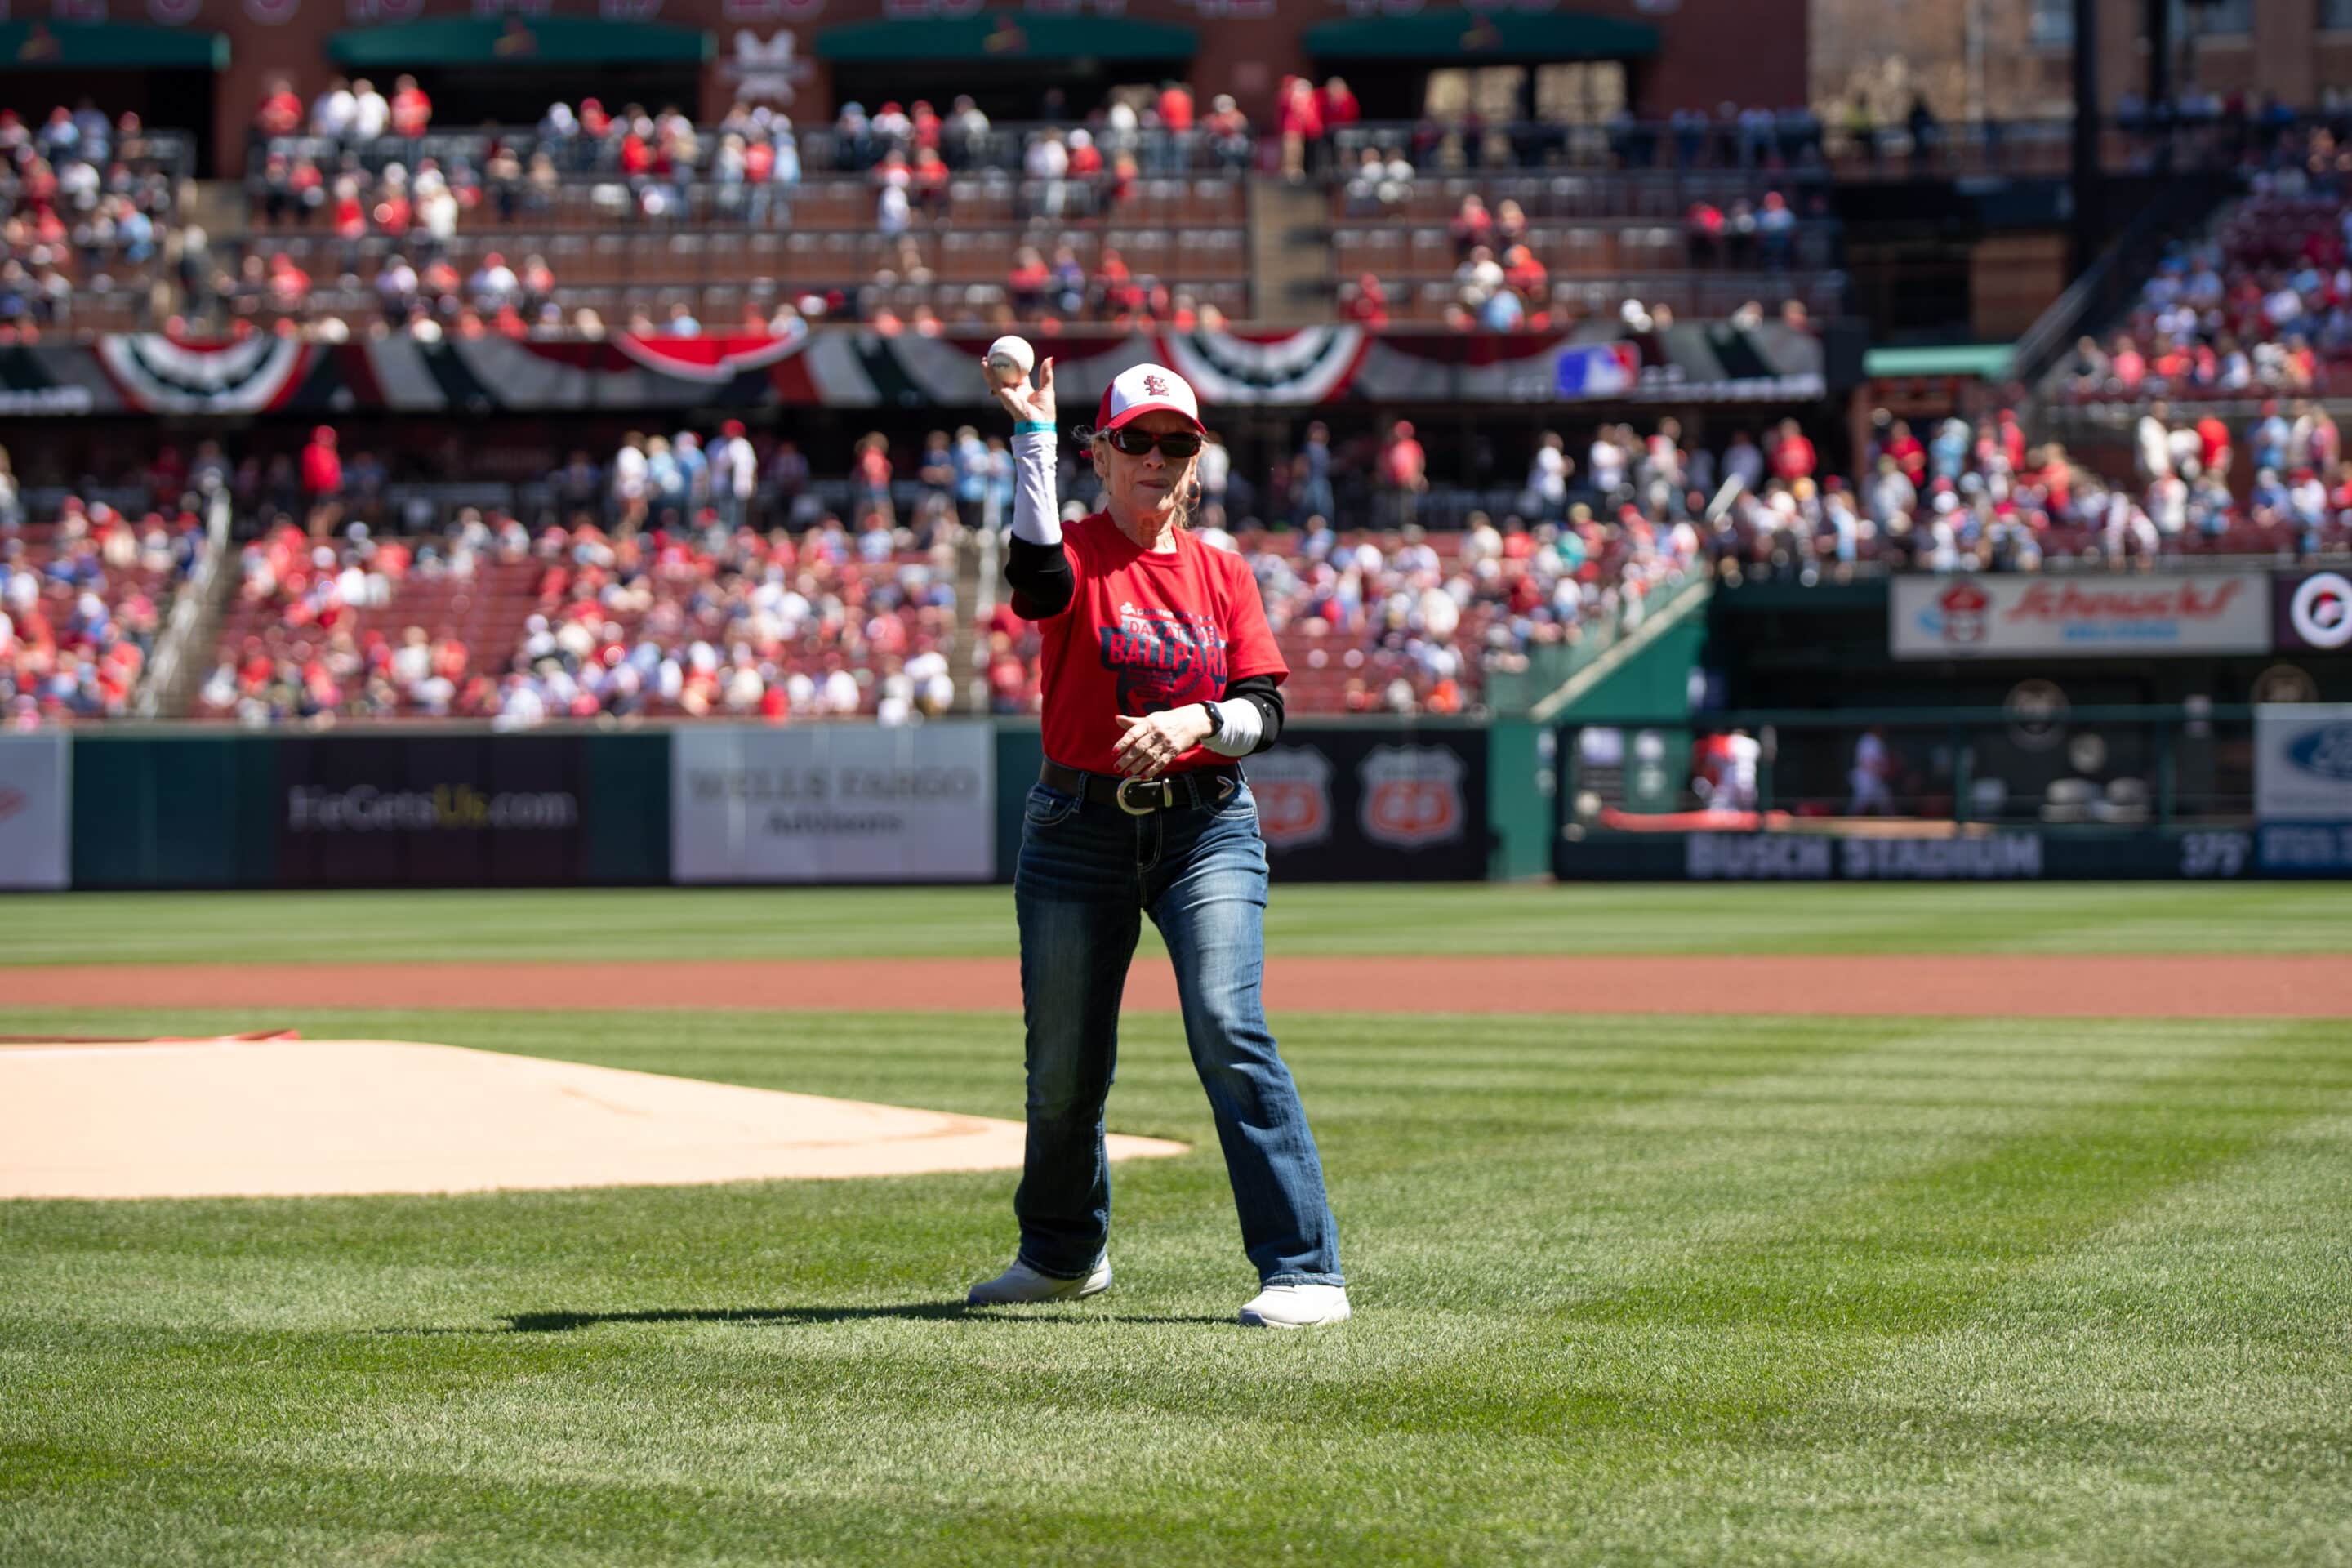 The St. Louis Baseball Cardinals took on the Toronto Blue Jays where Parents as Teachers staff member Phyllis McGuire threw out the ceremonial first pitch. 